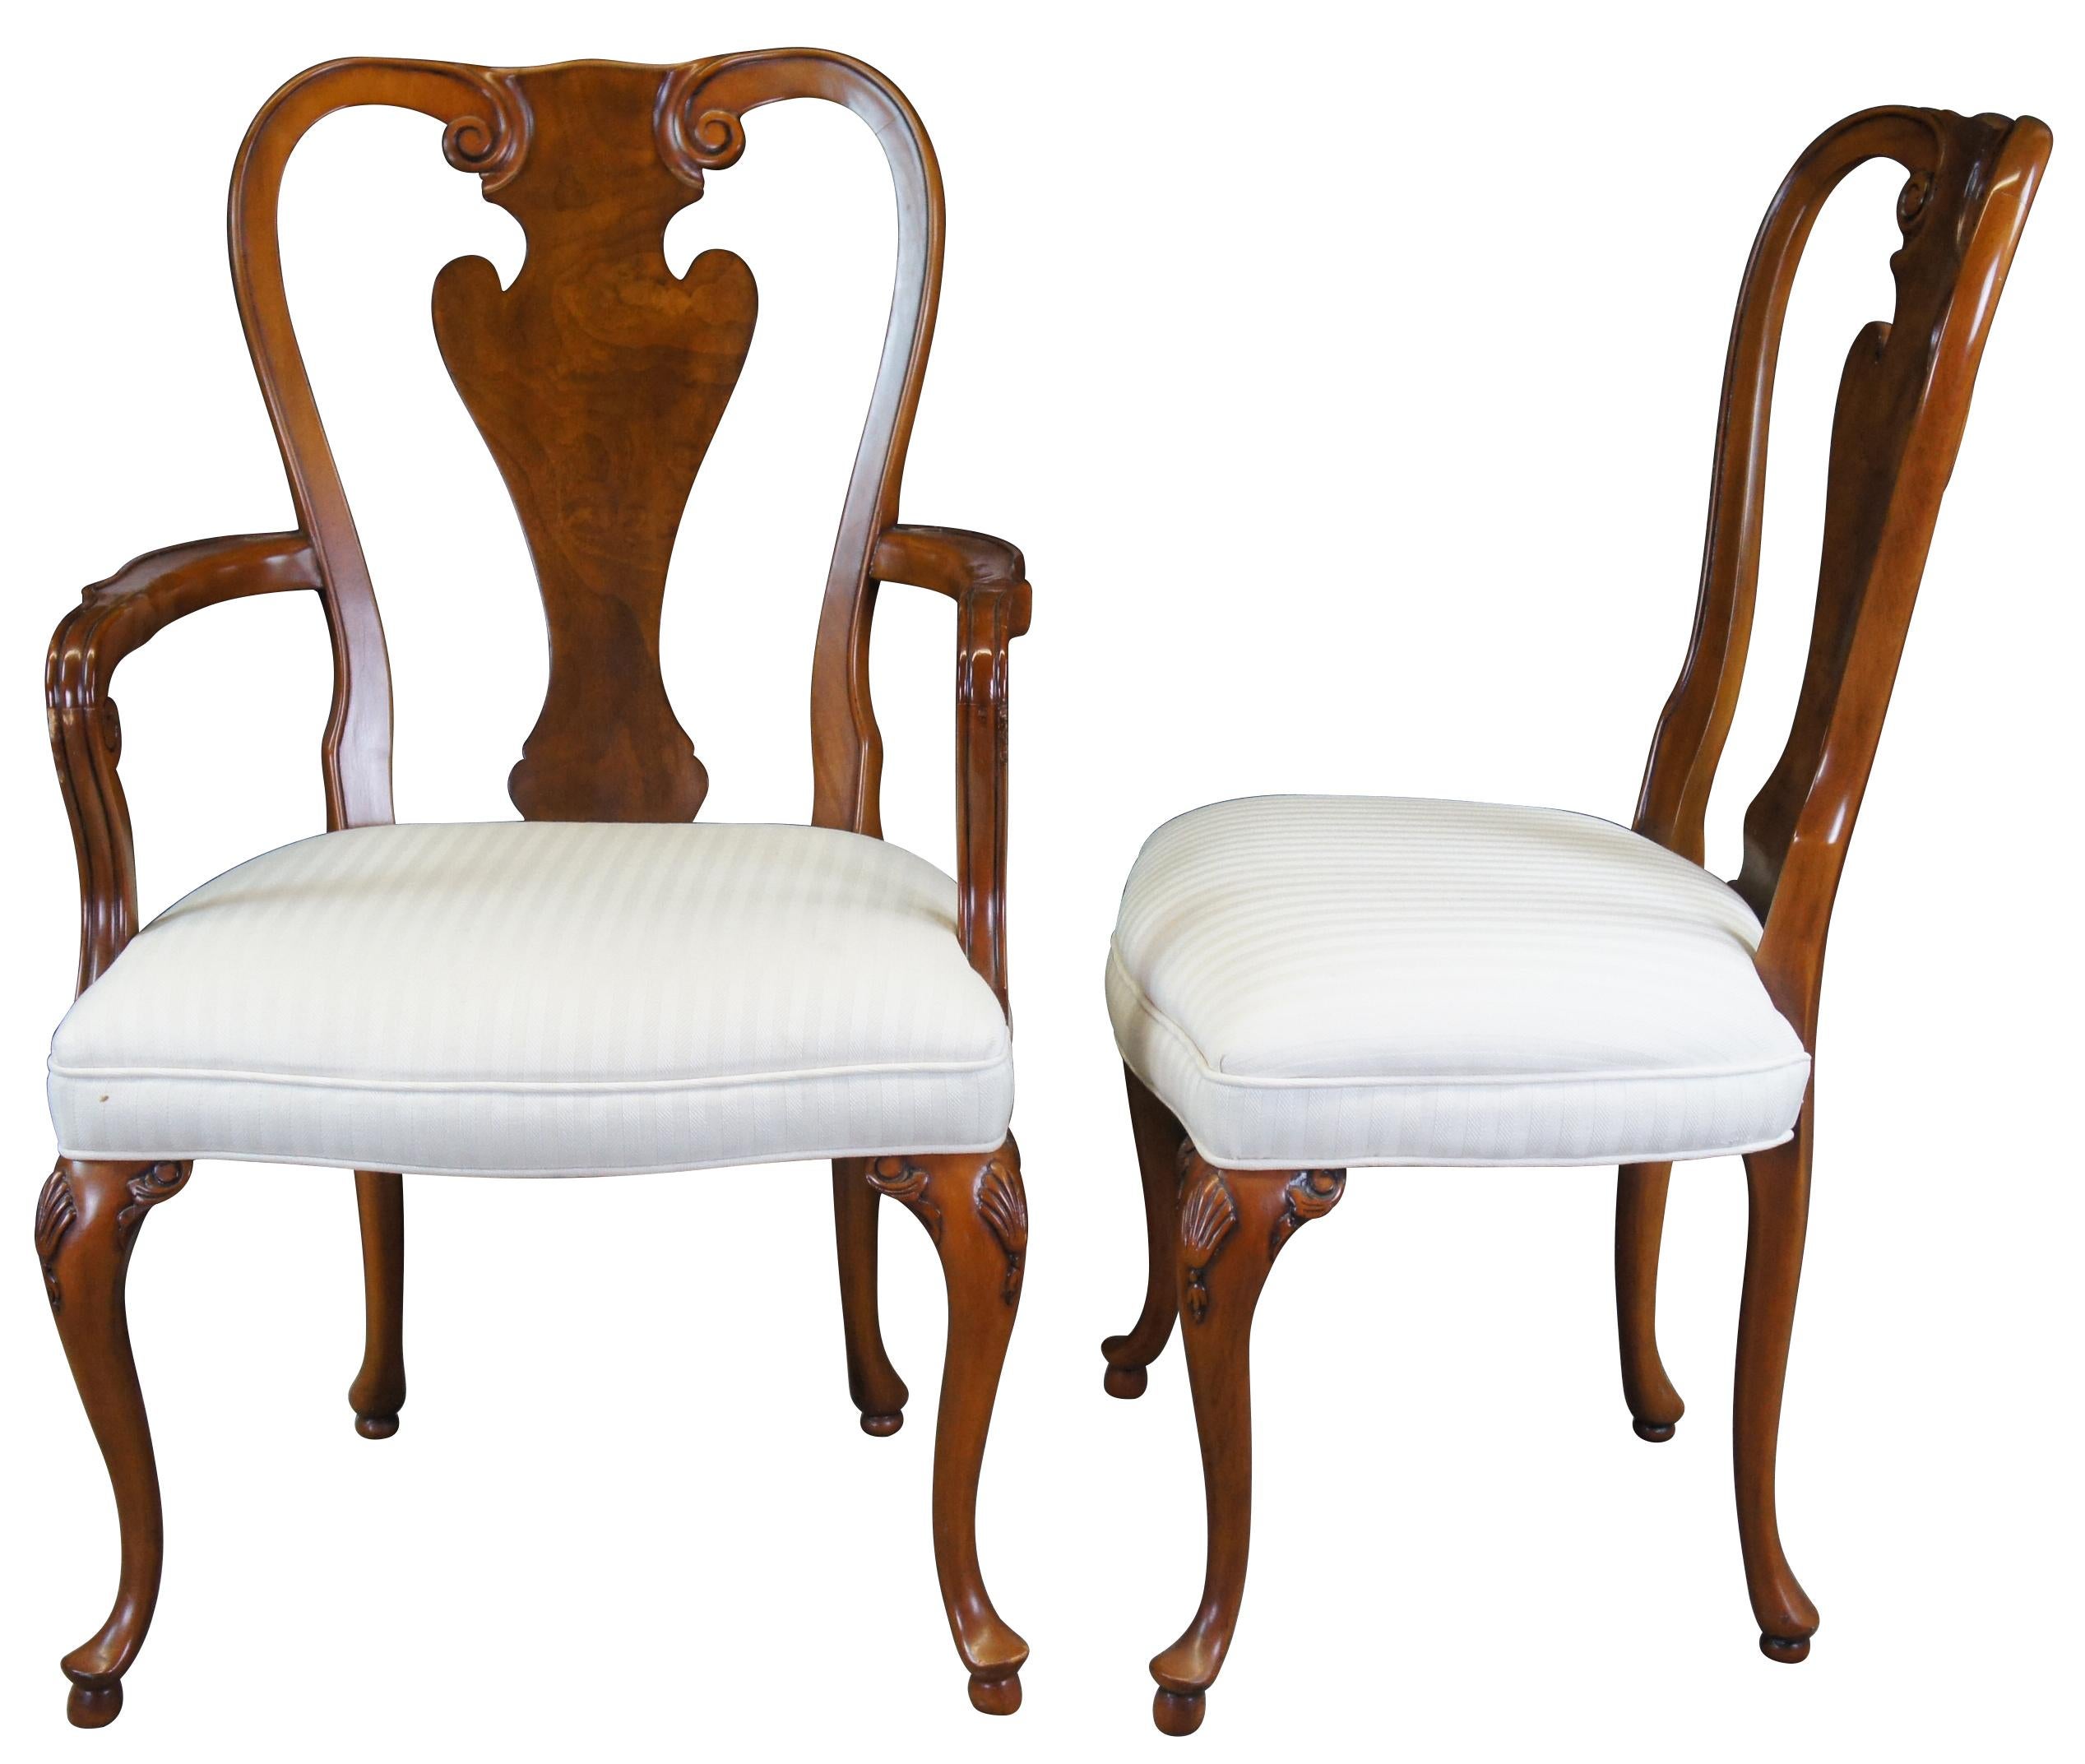 An exquisite set of 6 dining chairs from the Stately Homes Collection by Baker Furniture, circa 1980s. Made from mahogany with a vase shaped splat flanked by scrolled accents, an upholstered and striped seat and cabriole legs with scalloped knees.